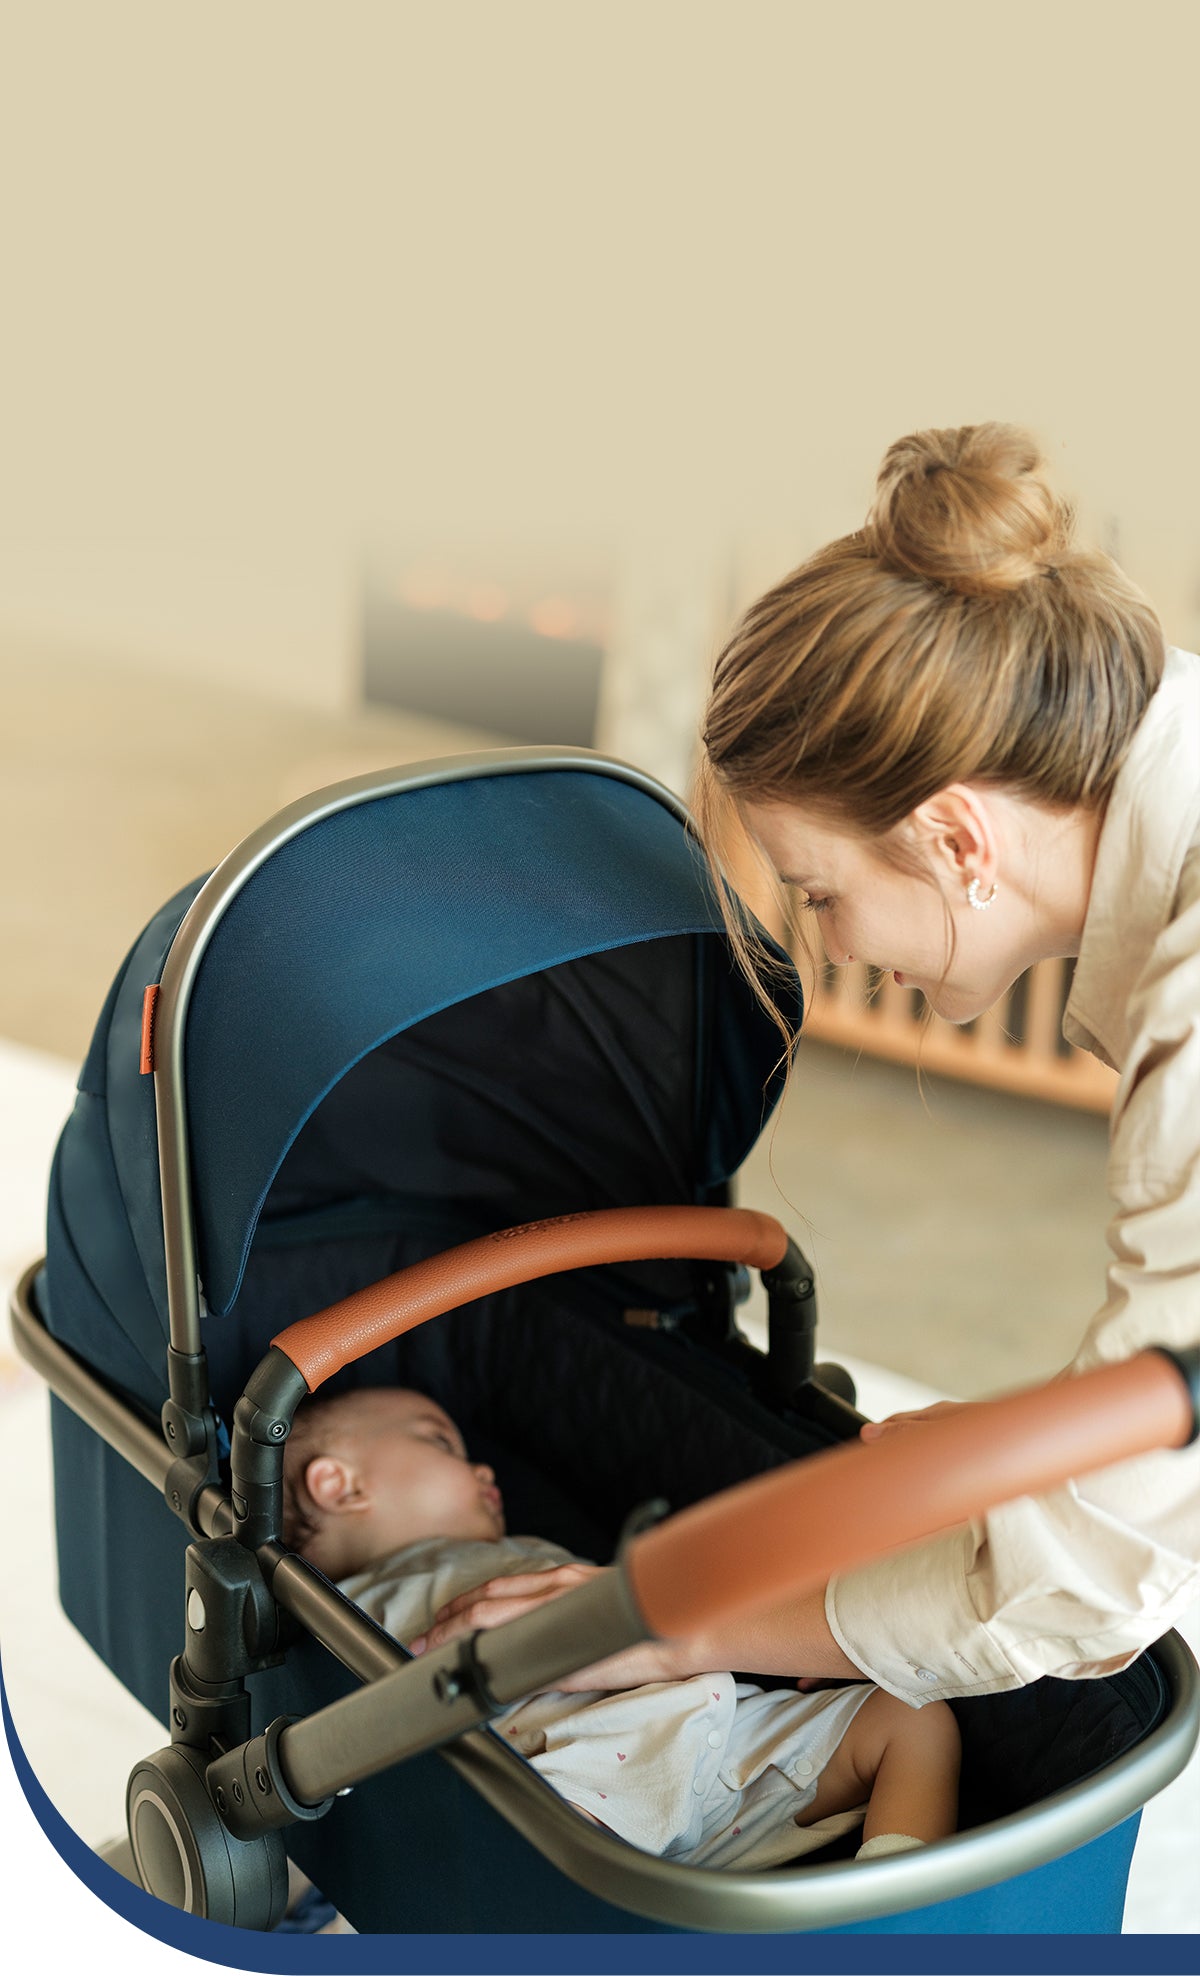 new mom with stroller